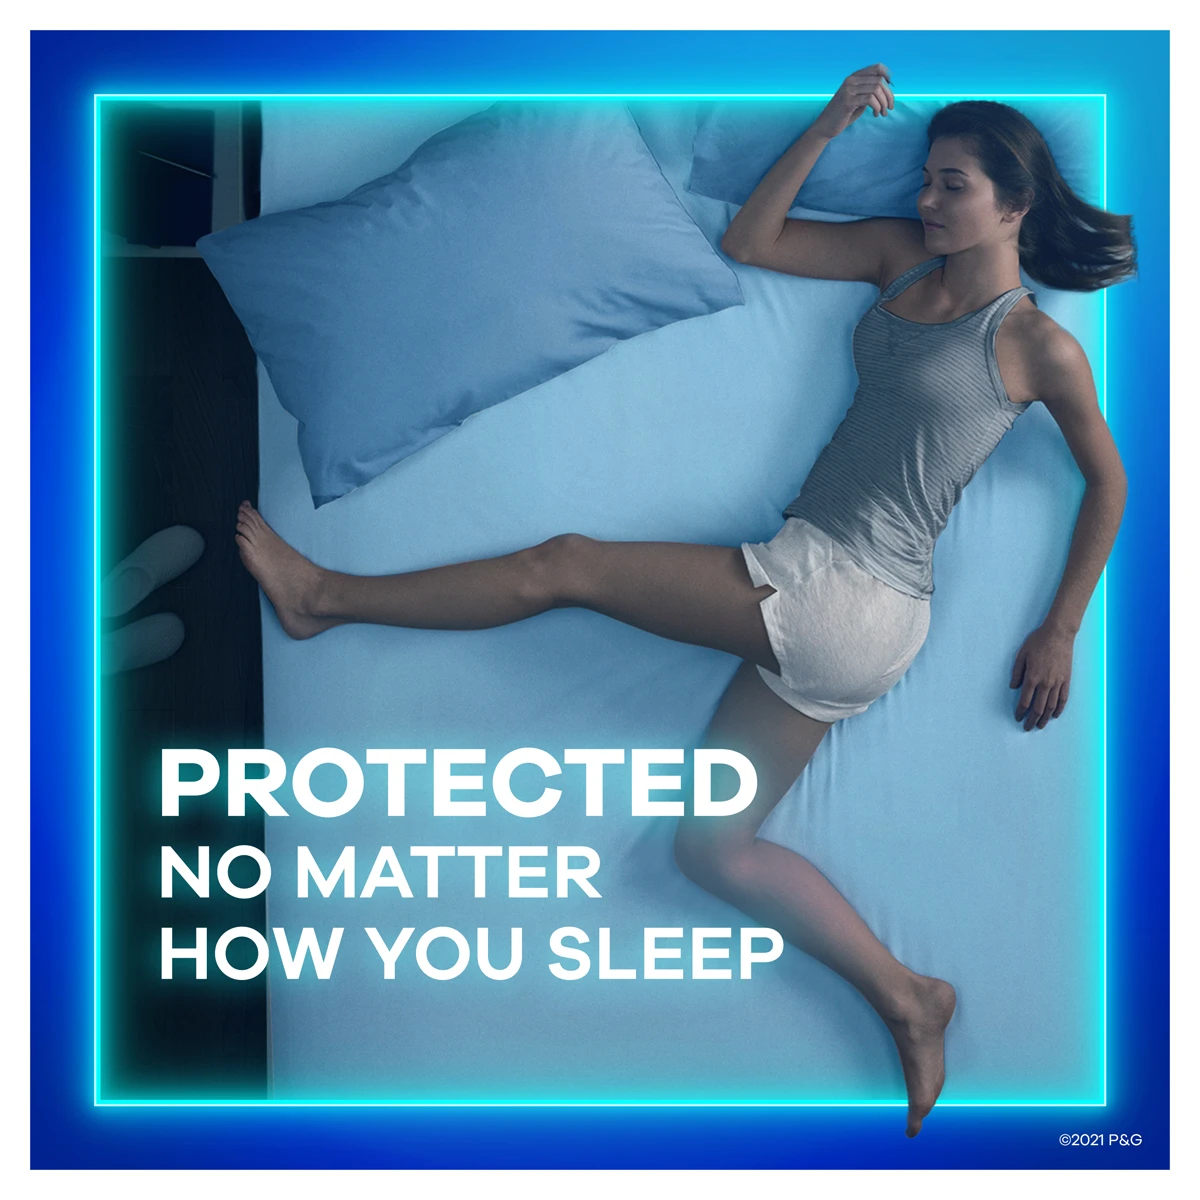 Always-Ultra-Protected-No-Matter-How-You-Sleep